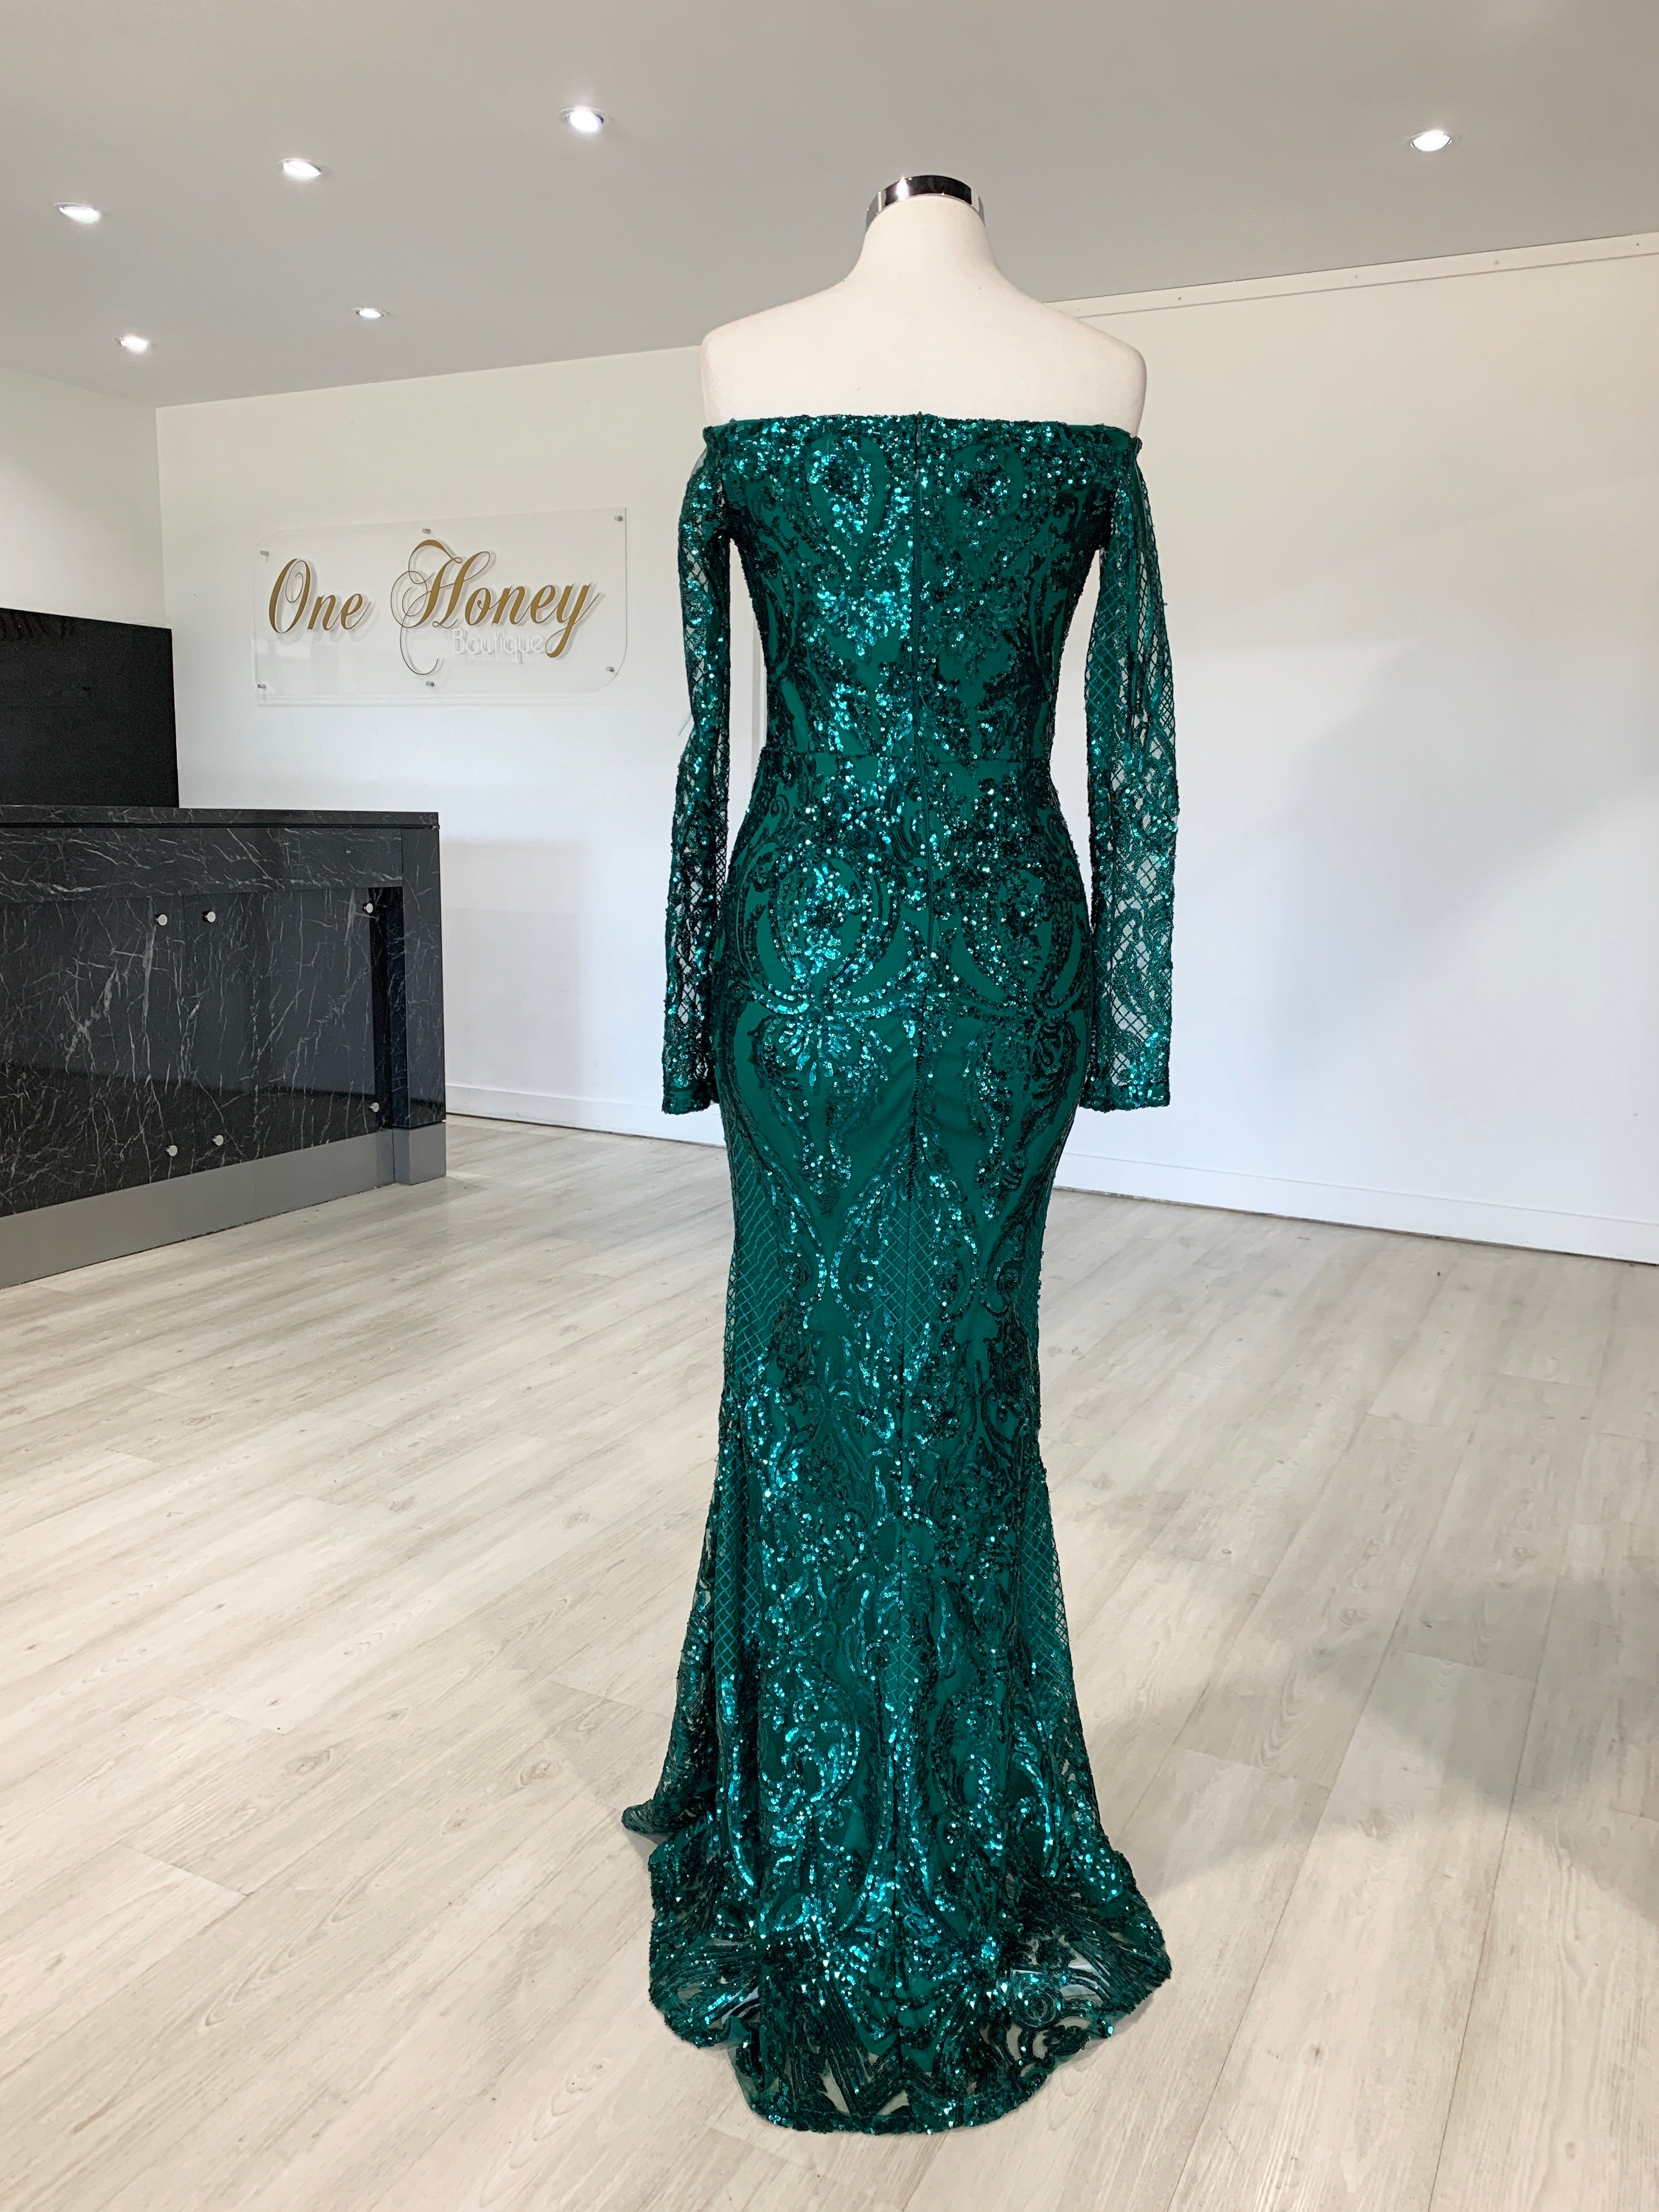 Honey Couture SOFIA Green Glitter Snake Long Sleeve Evening Gown Dress {vendor} AfterPay Humm ZipPay LayBuy Sezzle